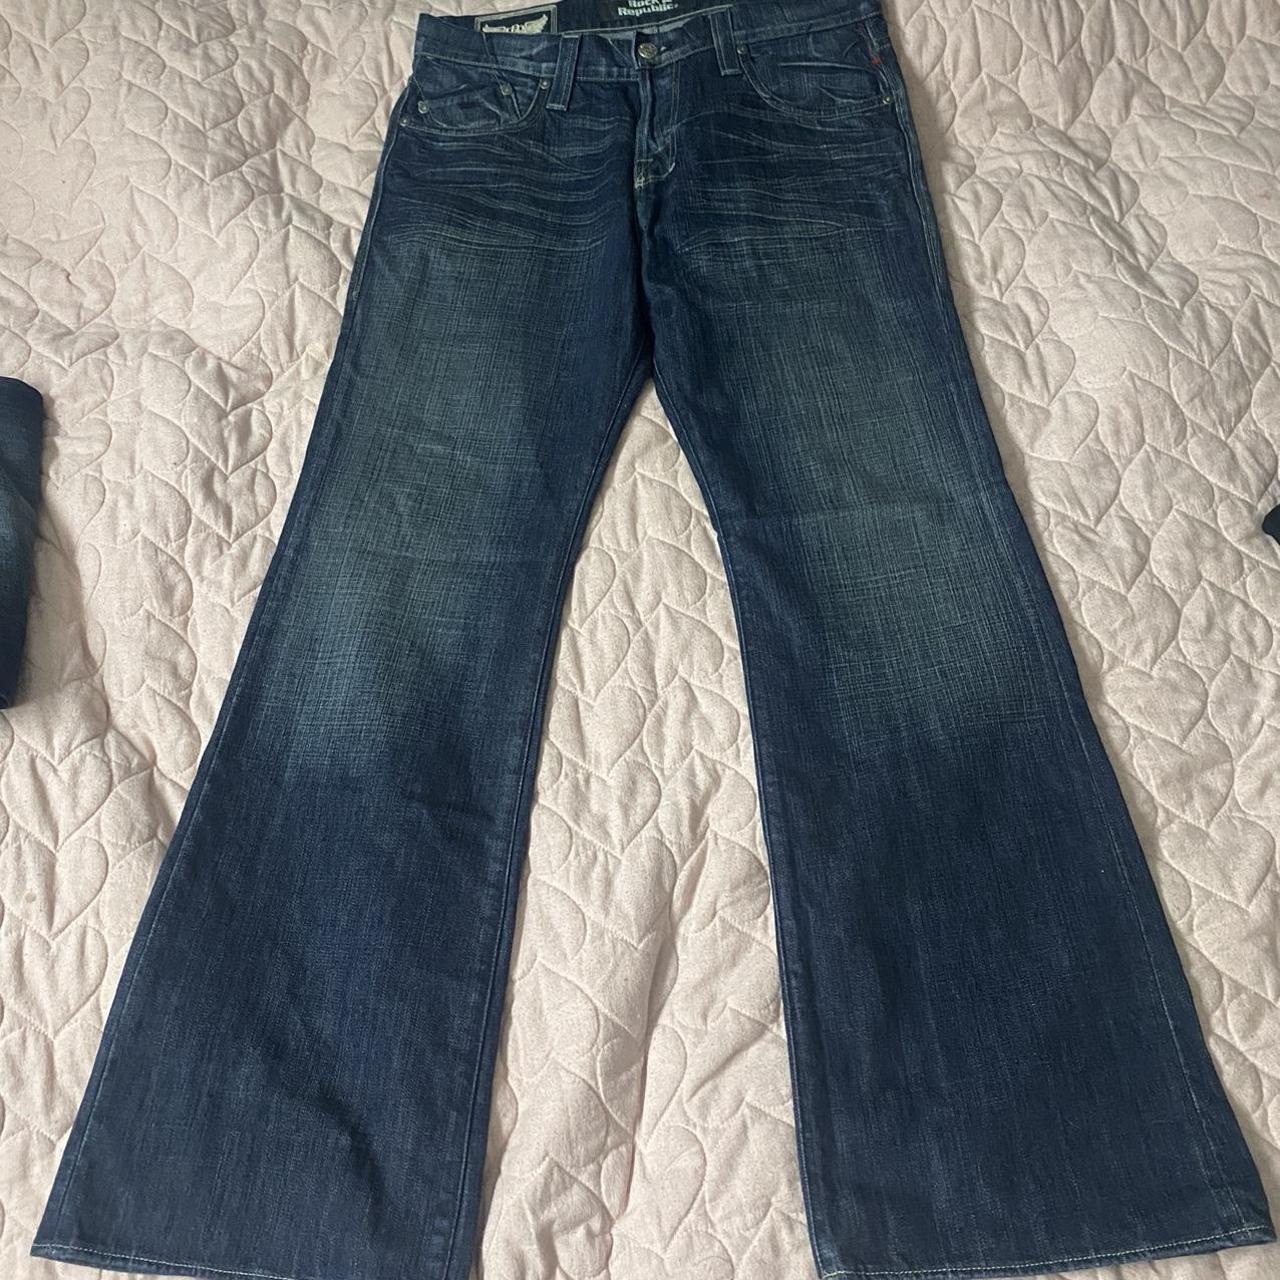 Rock and Republic Men's Blue and White Jeans (2)